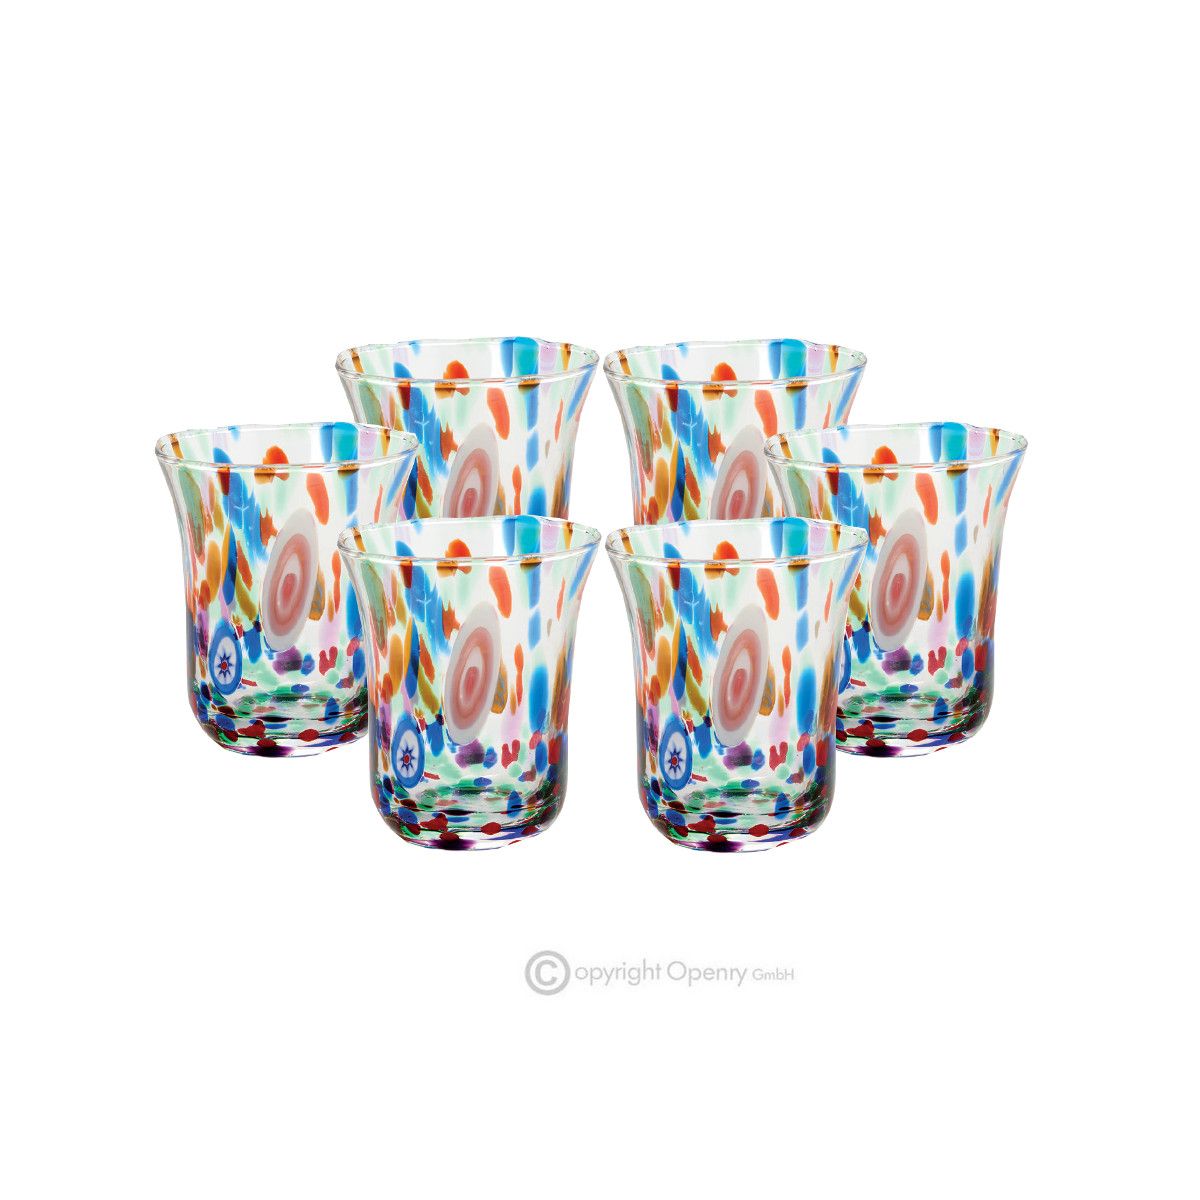 Boteghe - Real Made in Italy - Bicchieri Tumbler in cristallo Veneziano